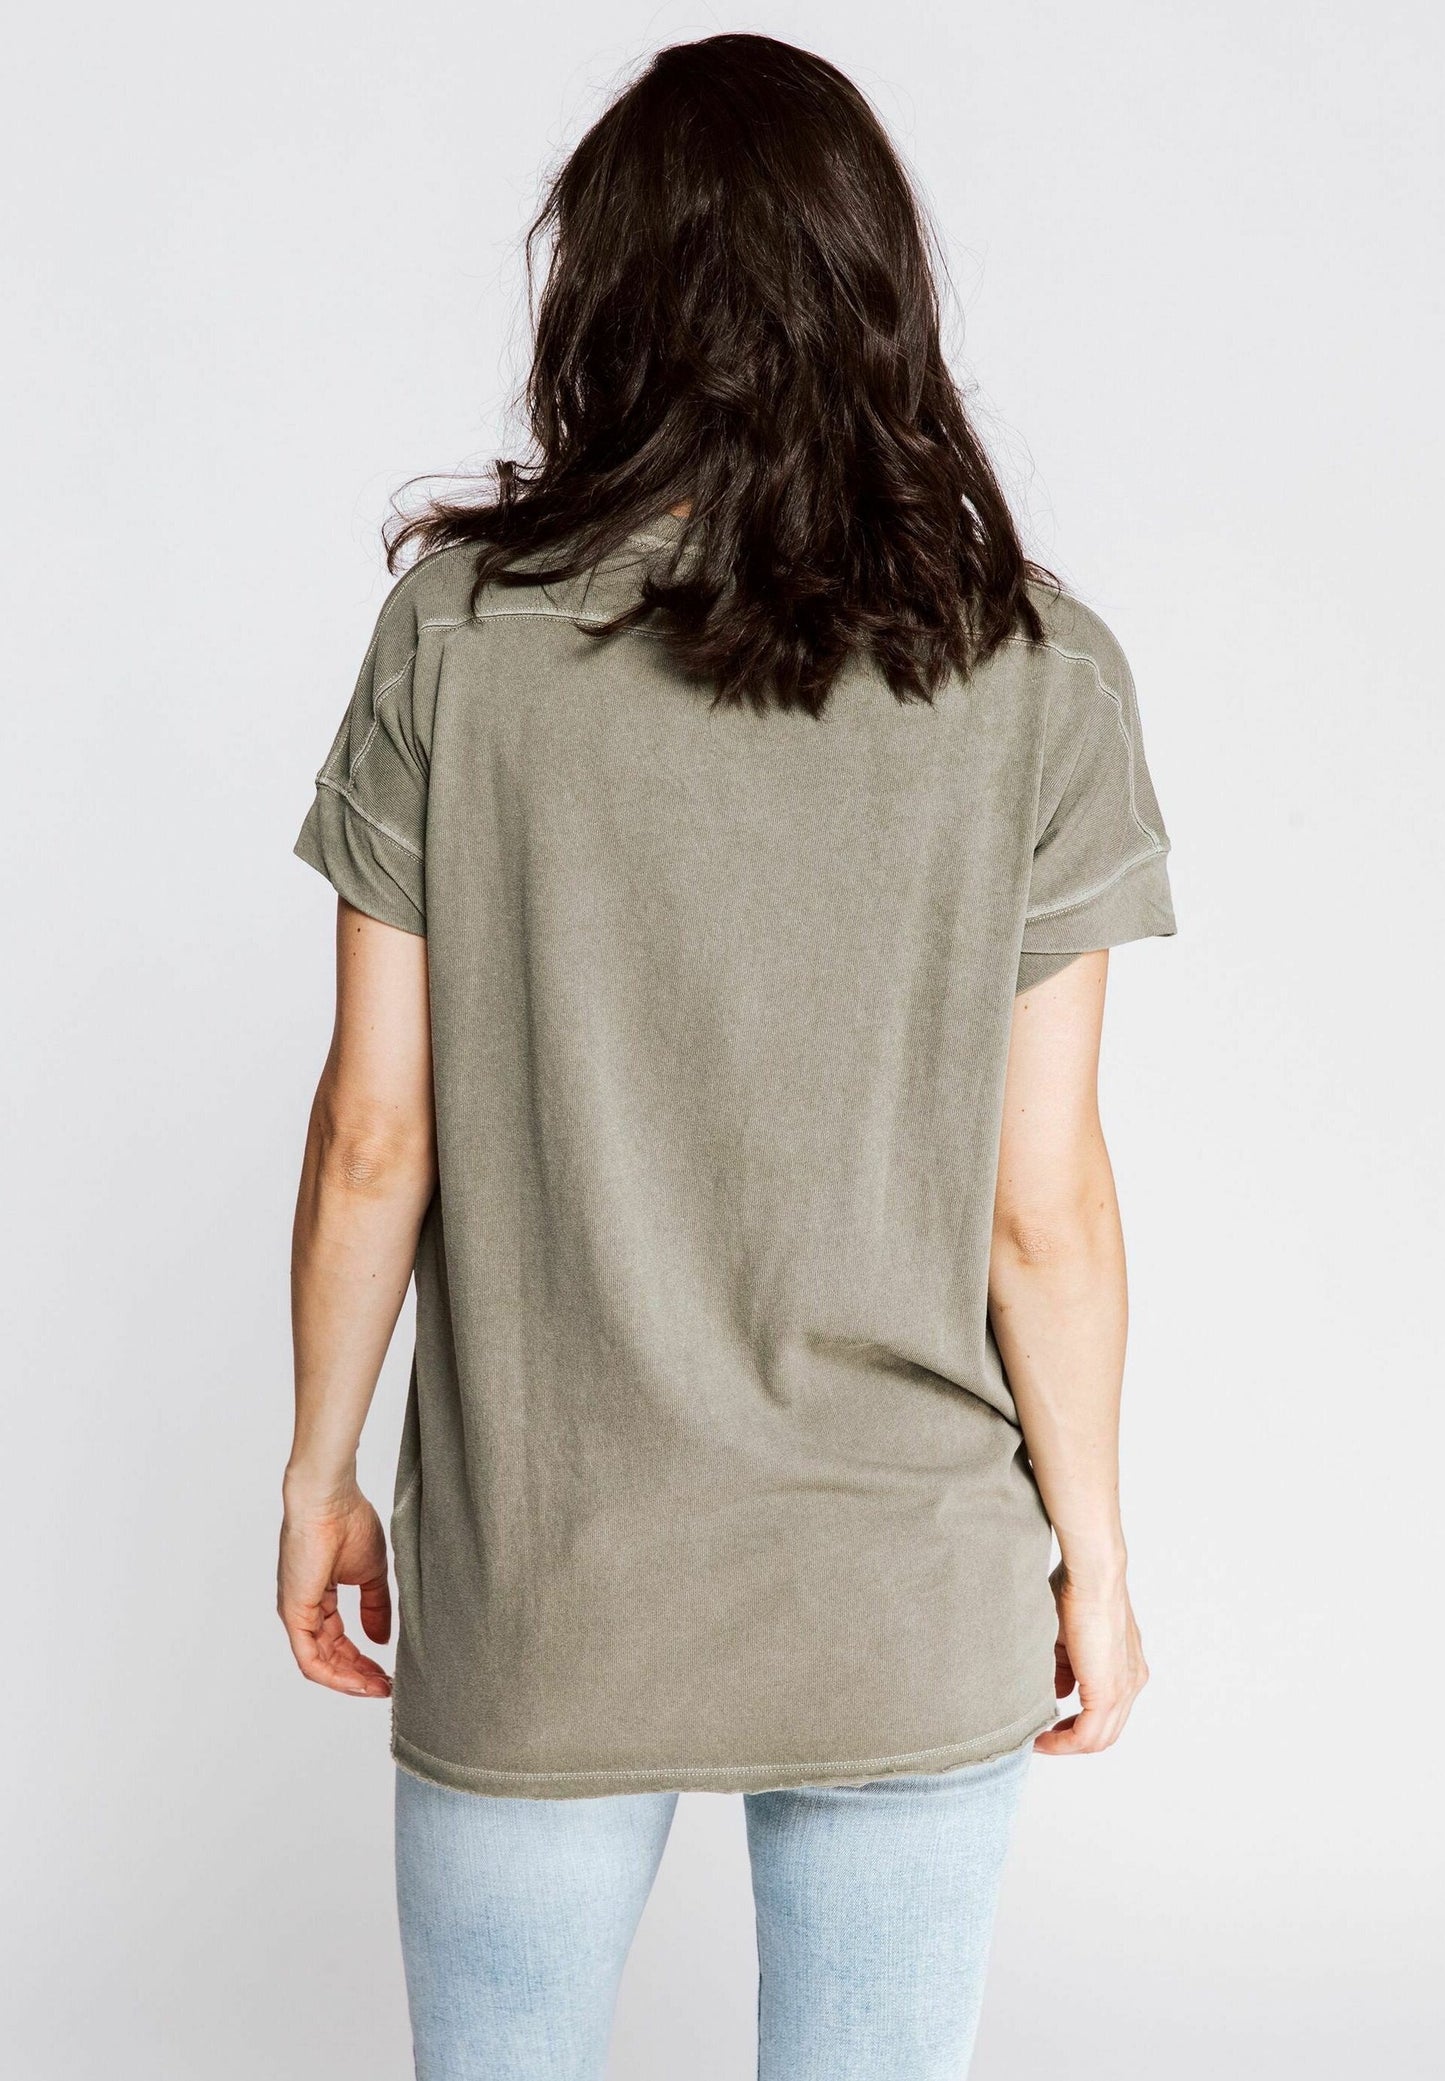 Zhrill- Rahel Maiden T-shirt Basic Olive Sign of Pampered – the